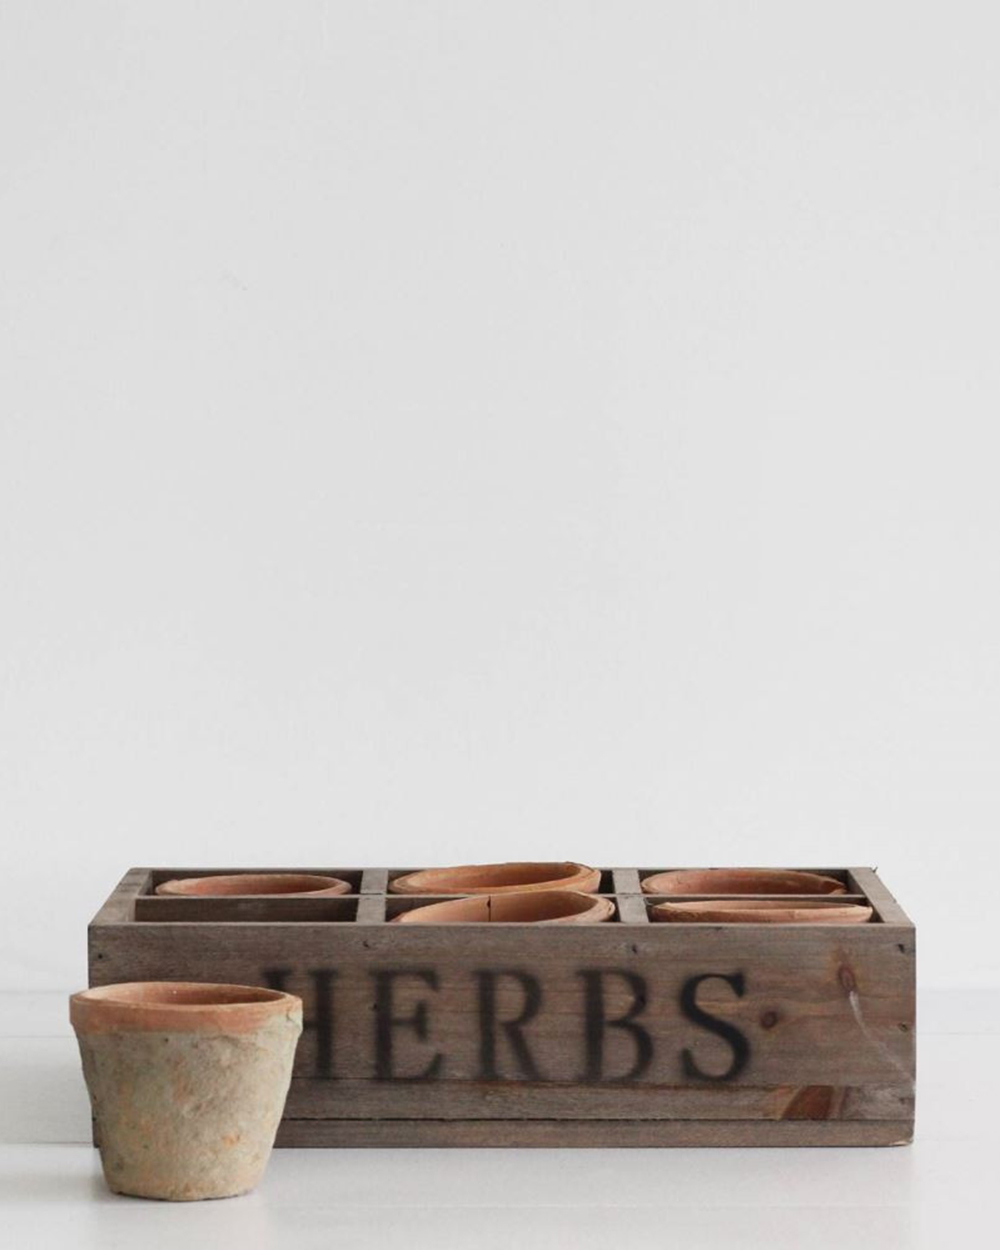 Antique resdtone herb pots, $72, from Father Rabbit.